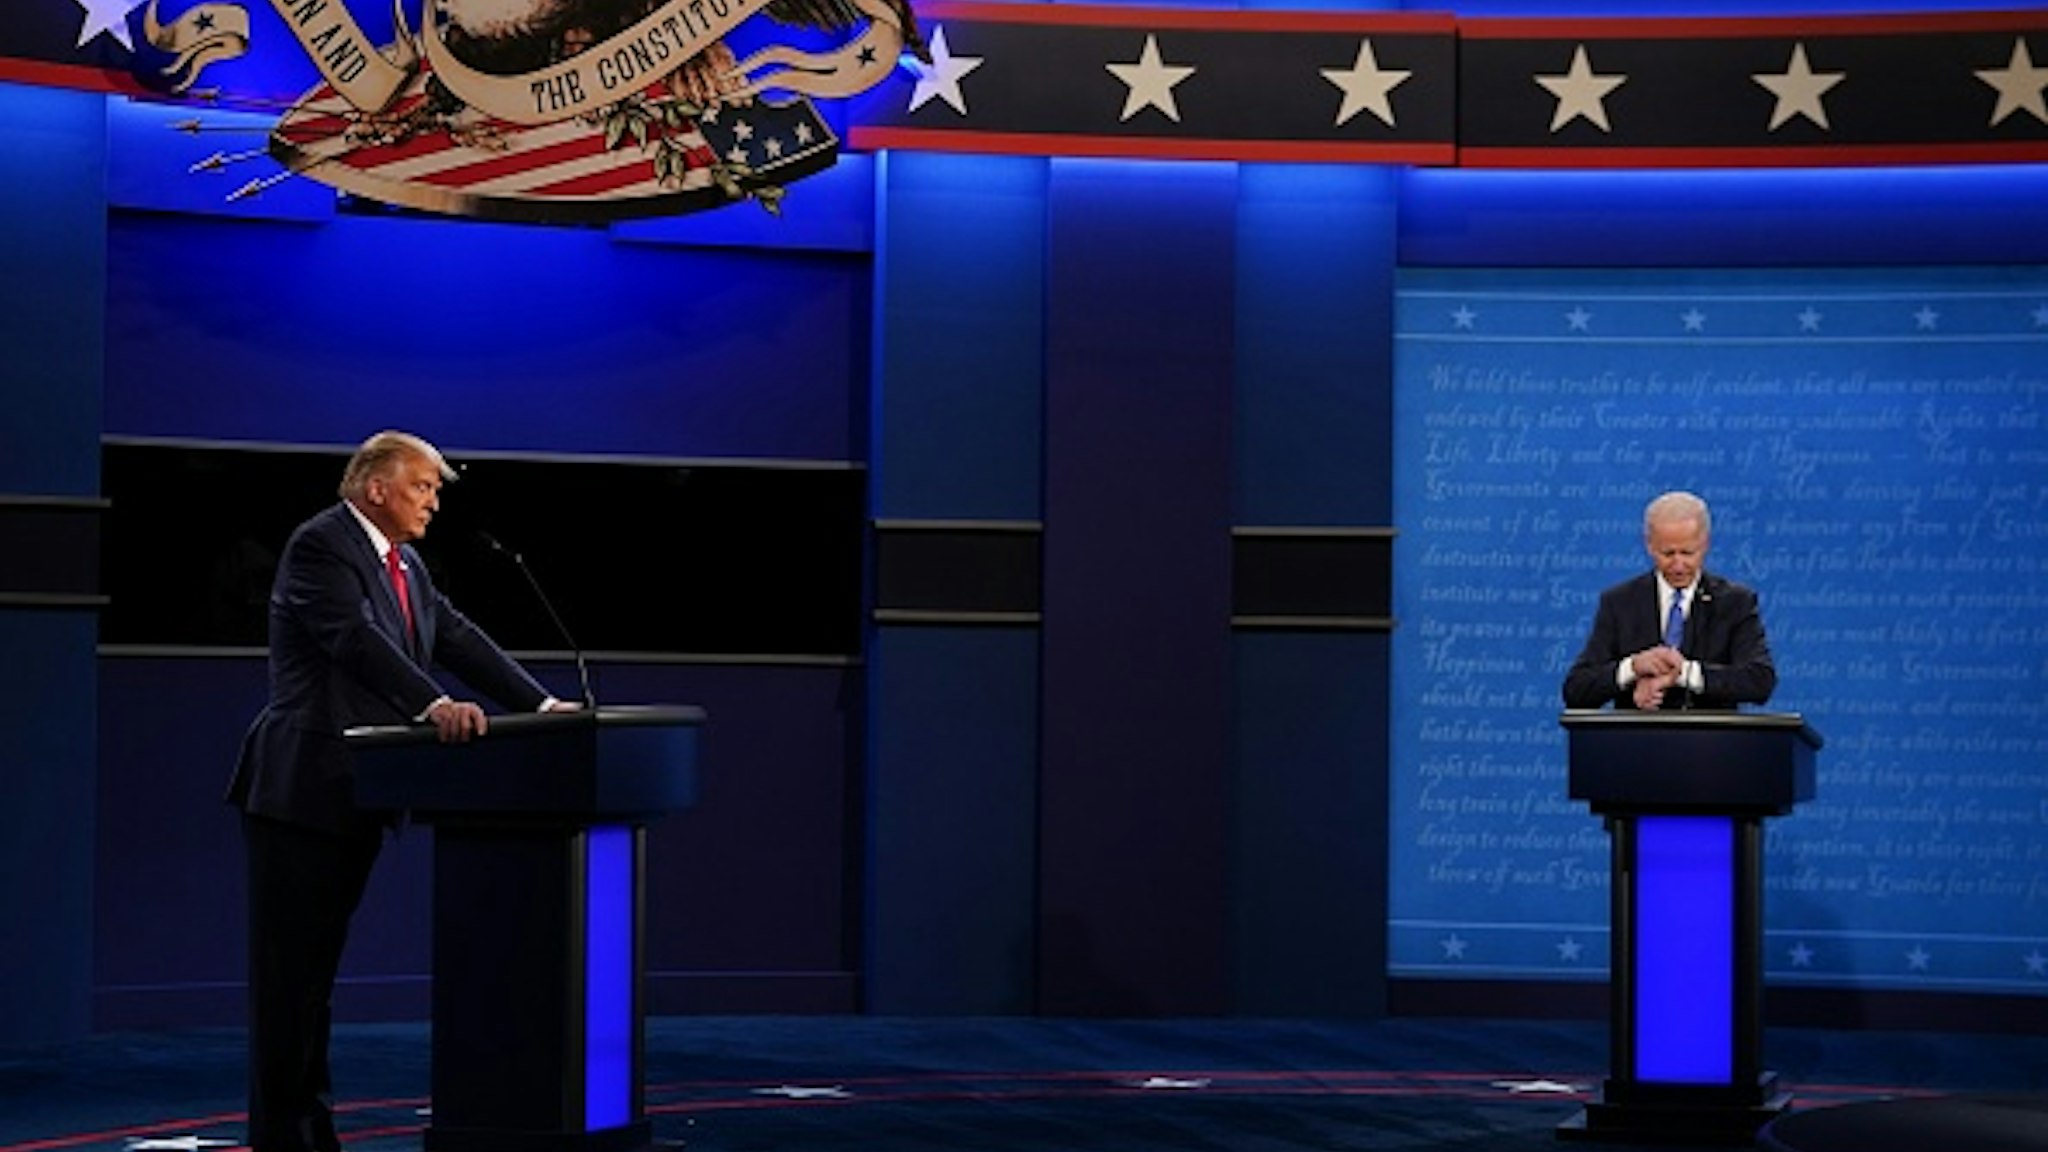 US President Donald Trump (L) and Democratic Presidential candidate and former US Vice President Joe Biden (R) participate in the final presidential debate at Belmont University in Nashville, Tennessee, on October 22, 2020.